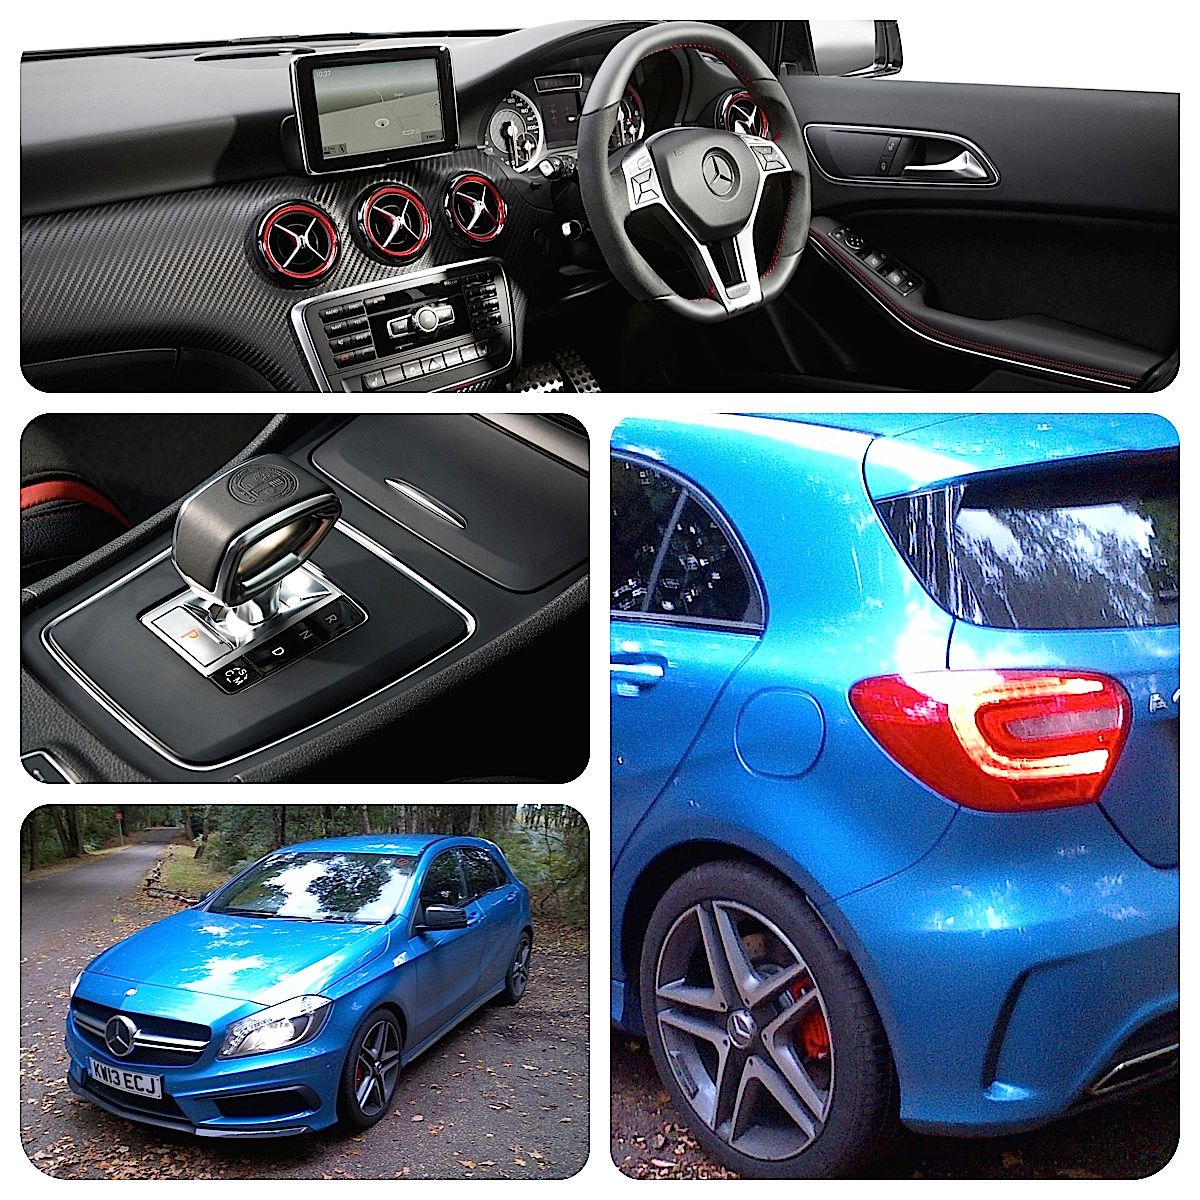 Driving the Mercedes-Benz A45 AMG Review